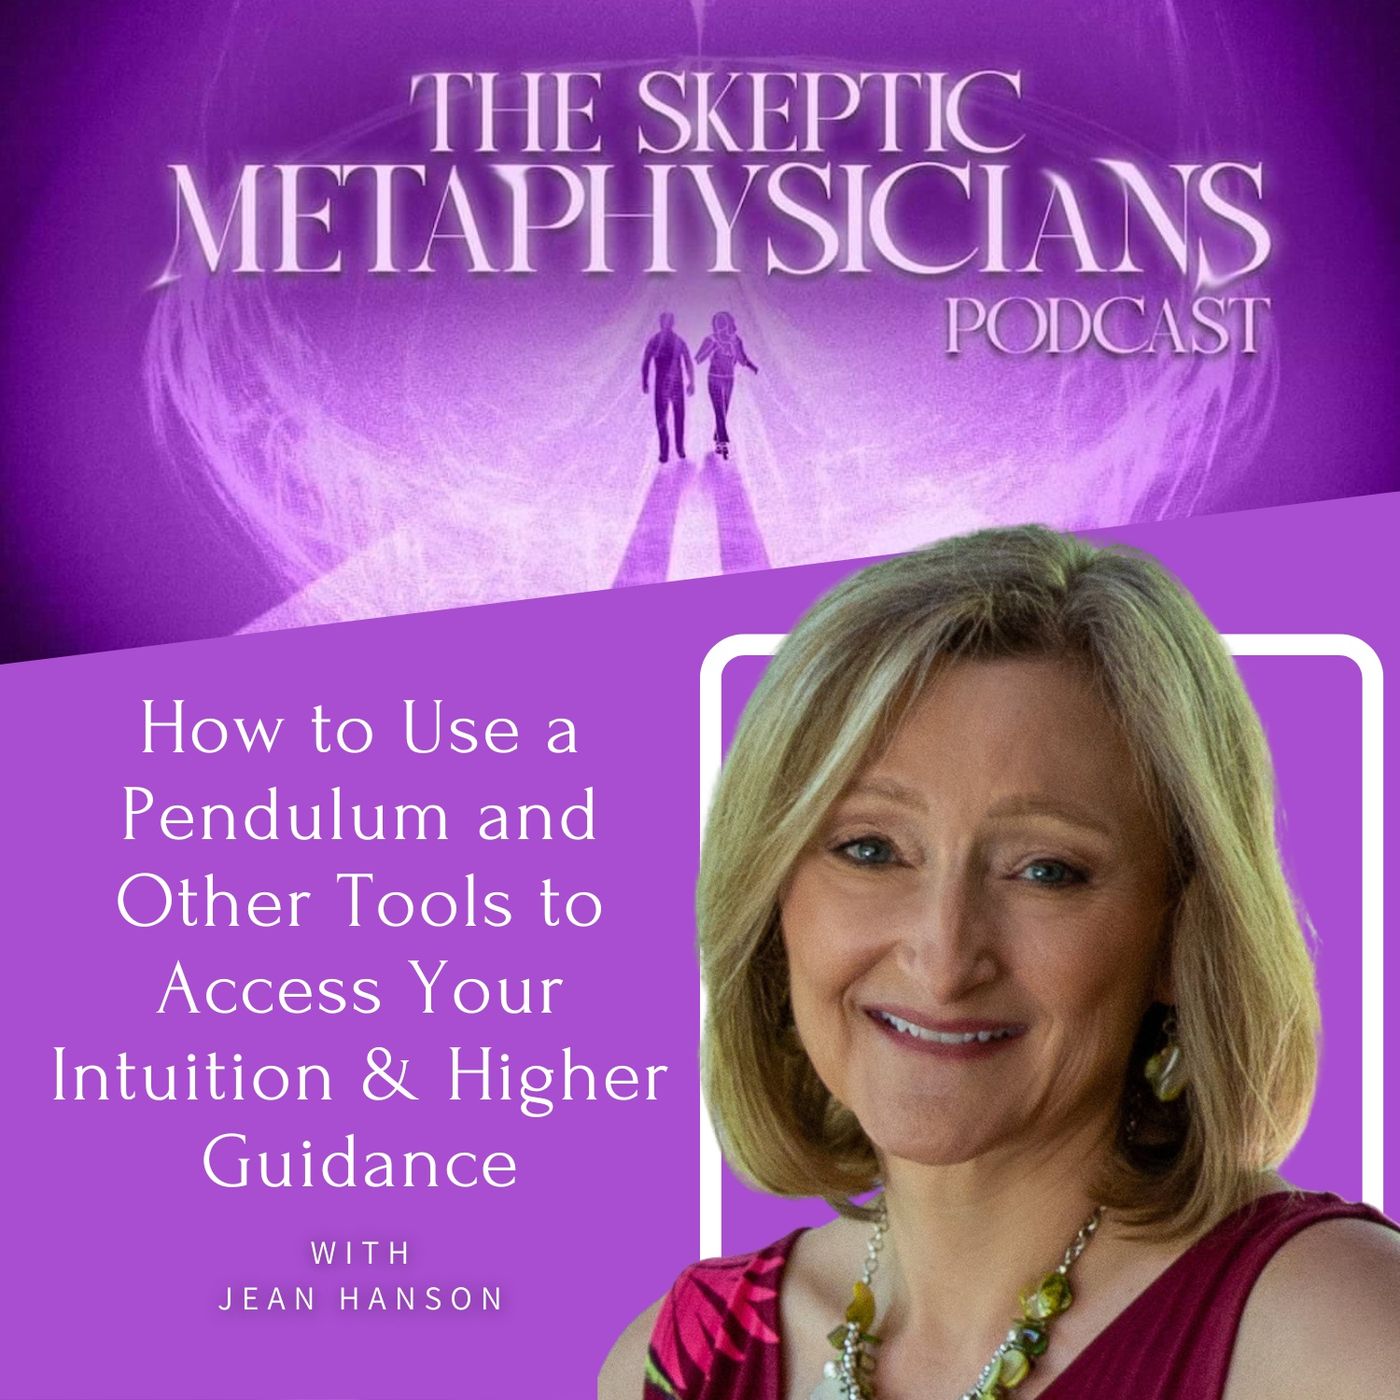 How to Use a Pendulum and Other Tools to Access Your Intuition and Higher Guidance